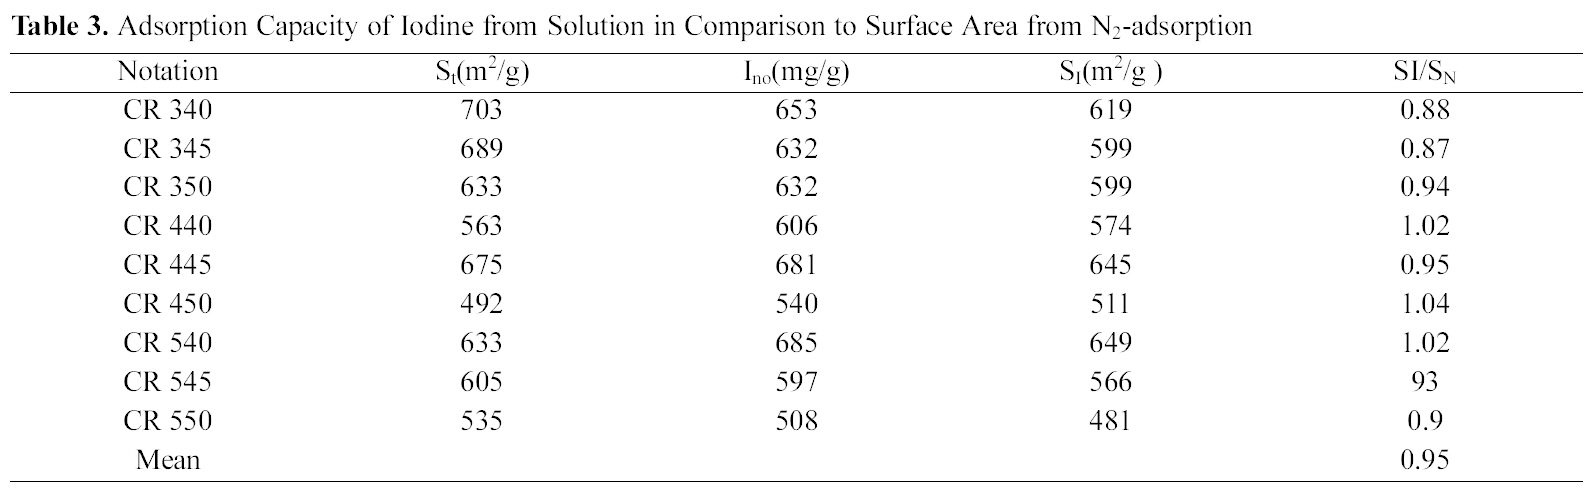 Adsorption Capacity of Iodine from Solution in Comparison to Surface Area from N2-adsorption